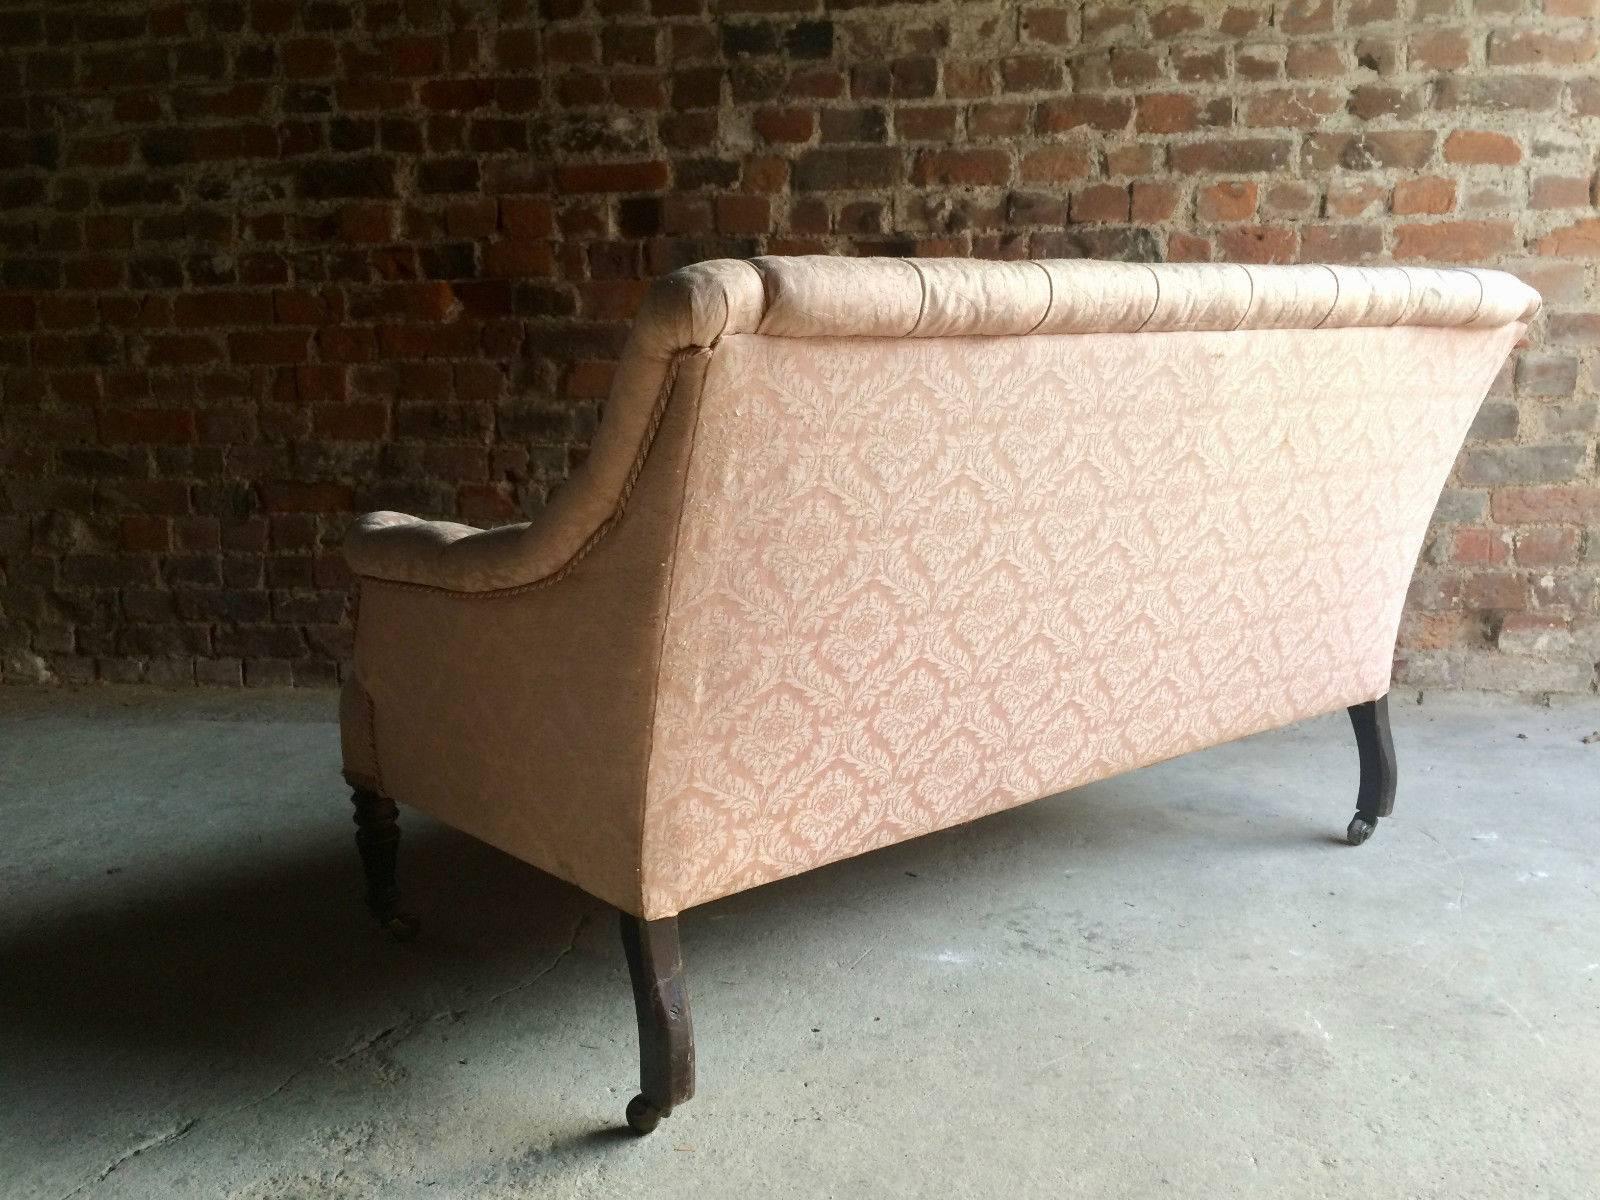 A magnificent 19th century Victorian mahogany framed salon sofa settee circa 1870, button back two seater upholstered in pink satin damask fabric with turned front legs terminating in brass casters, the sofa is offered in excellent condition with